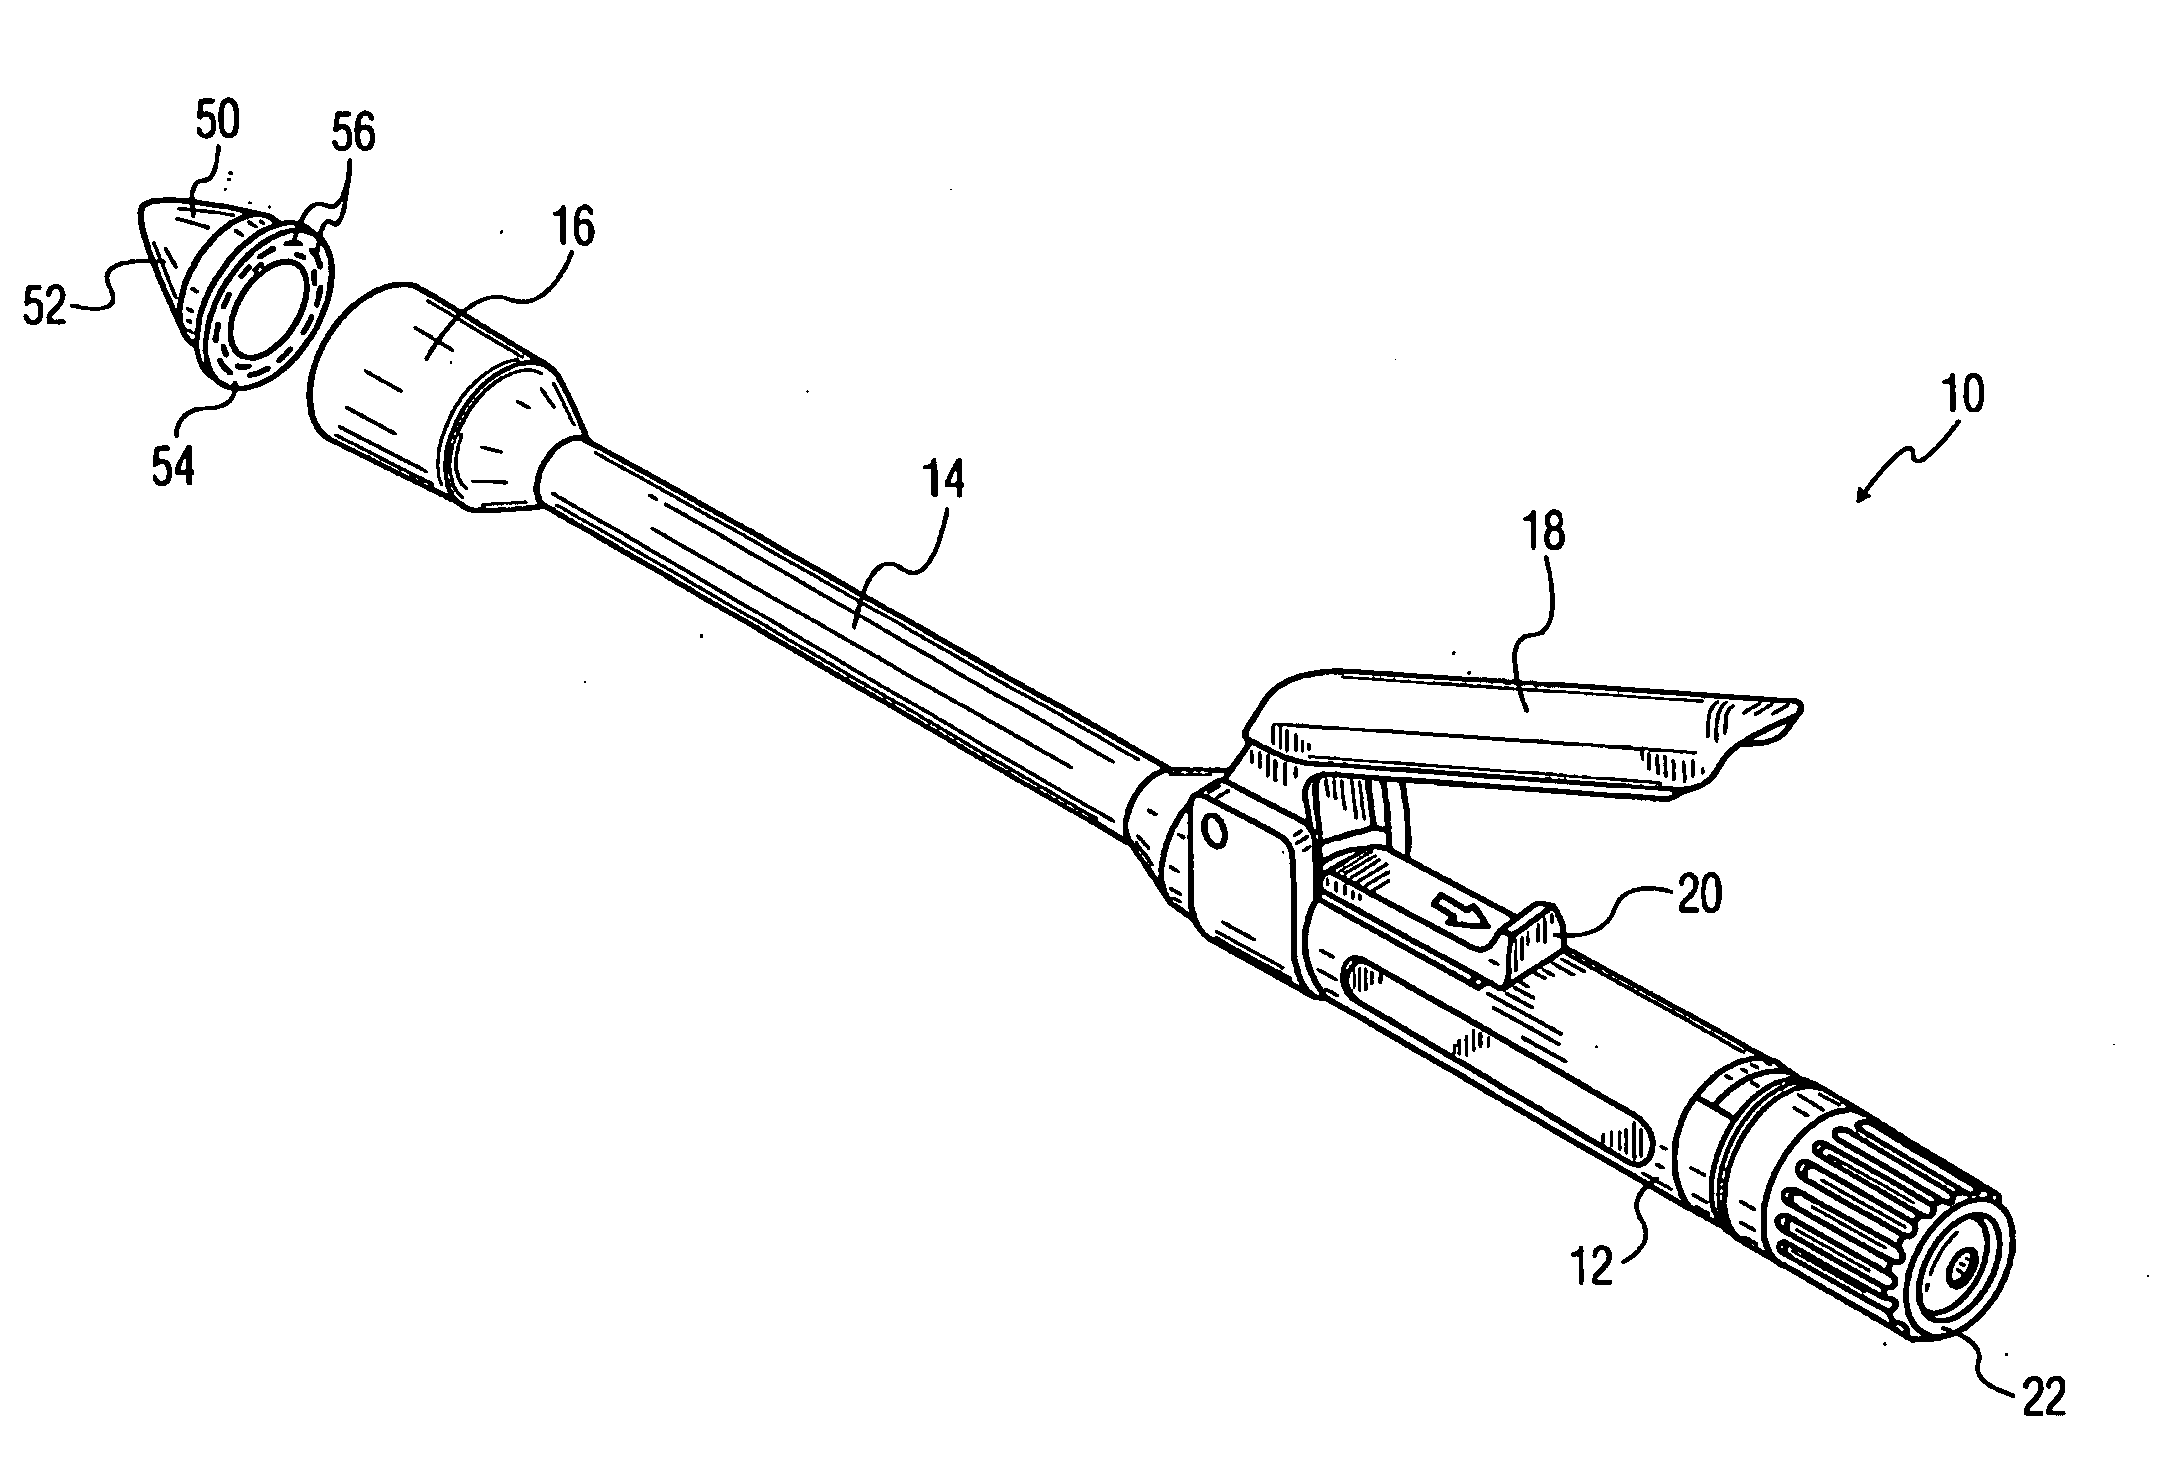 Surgical stapler with magnetically secured components